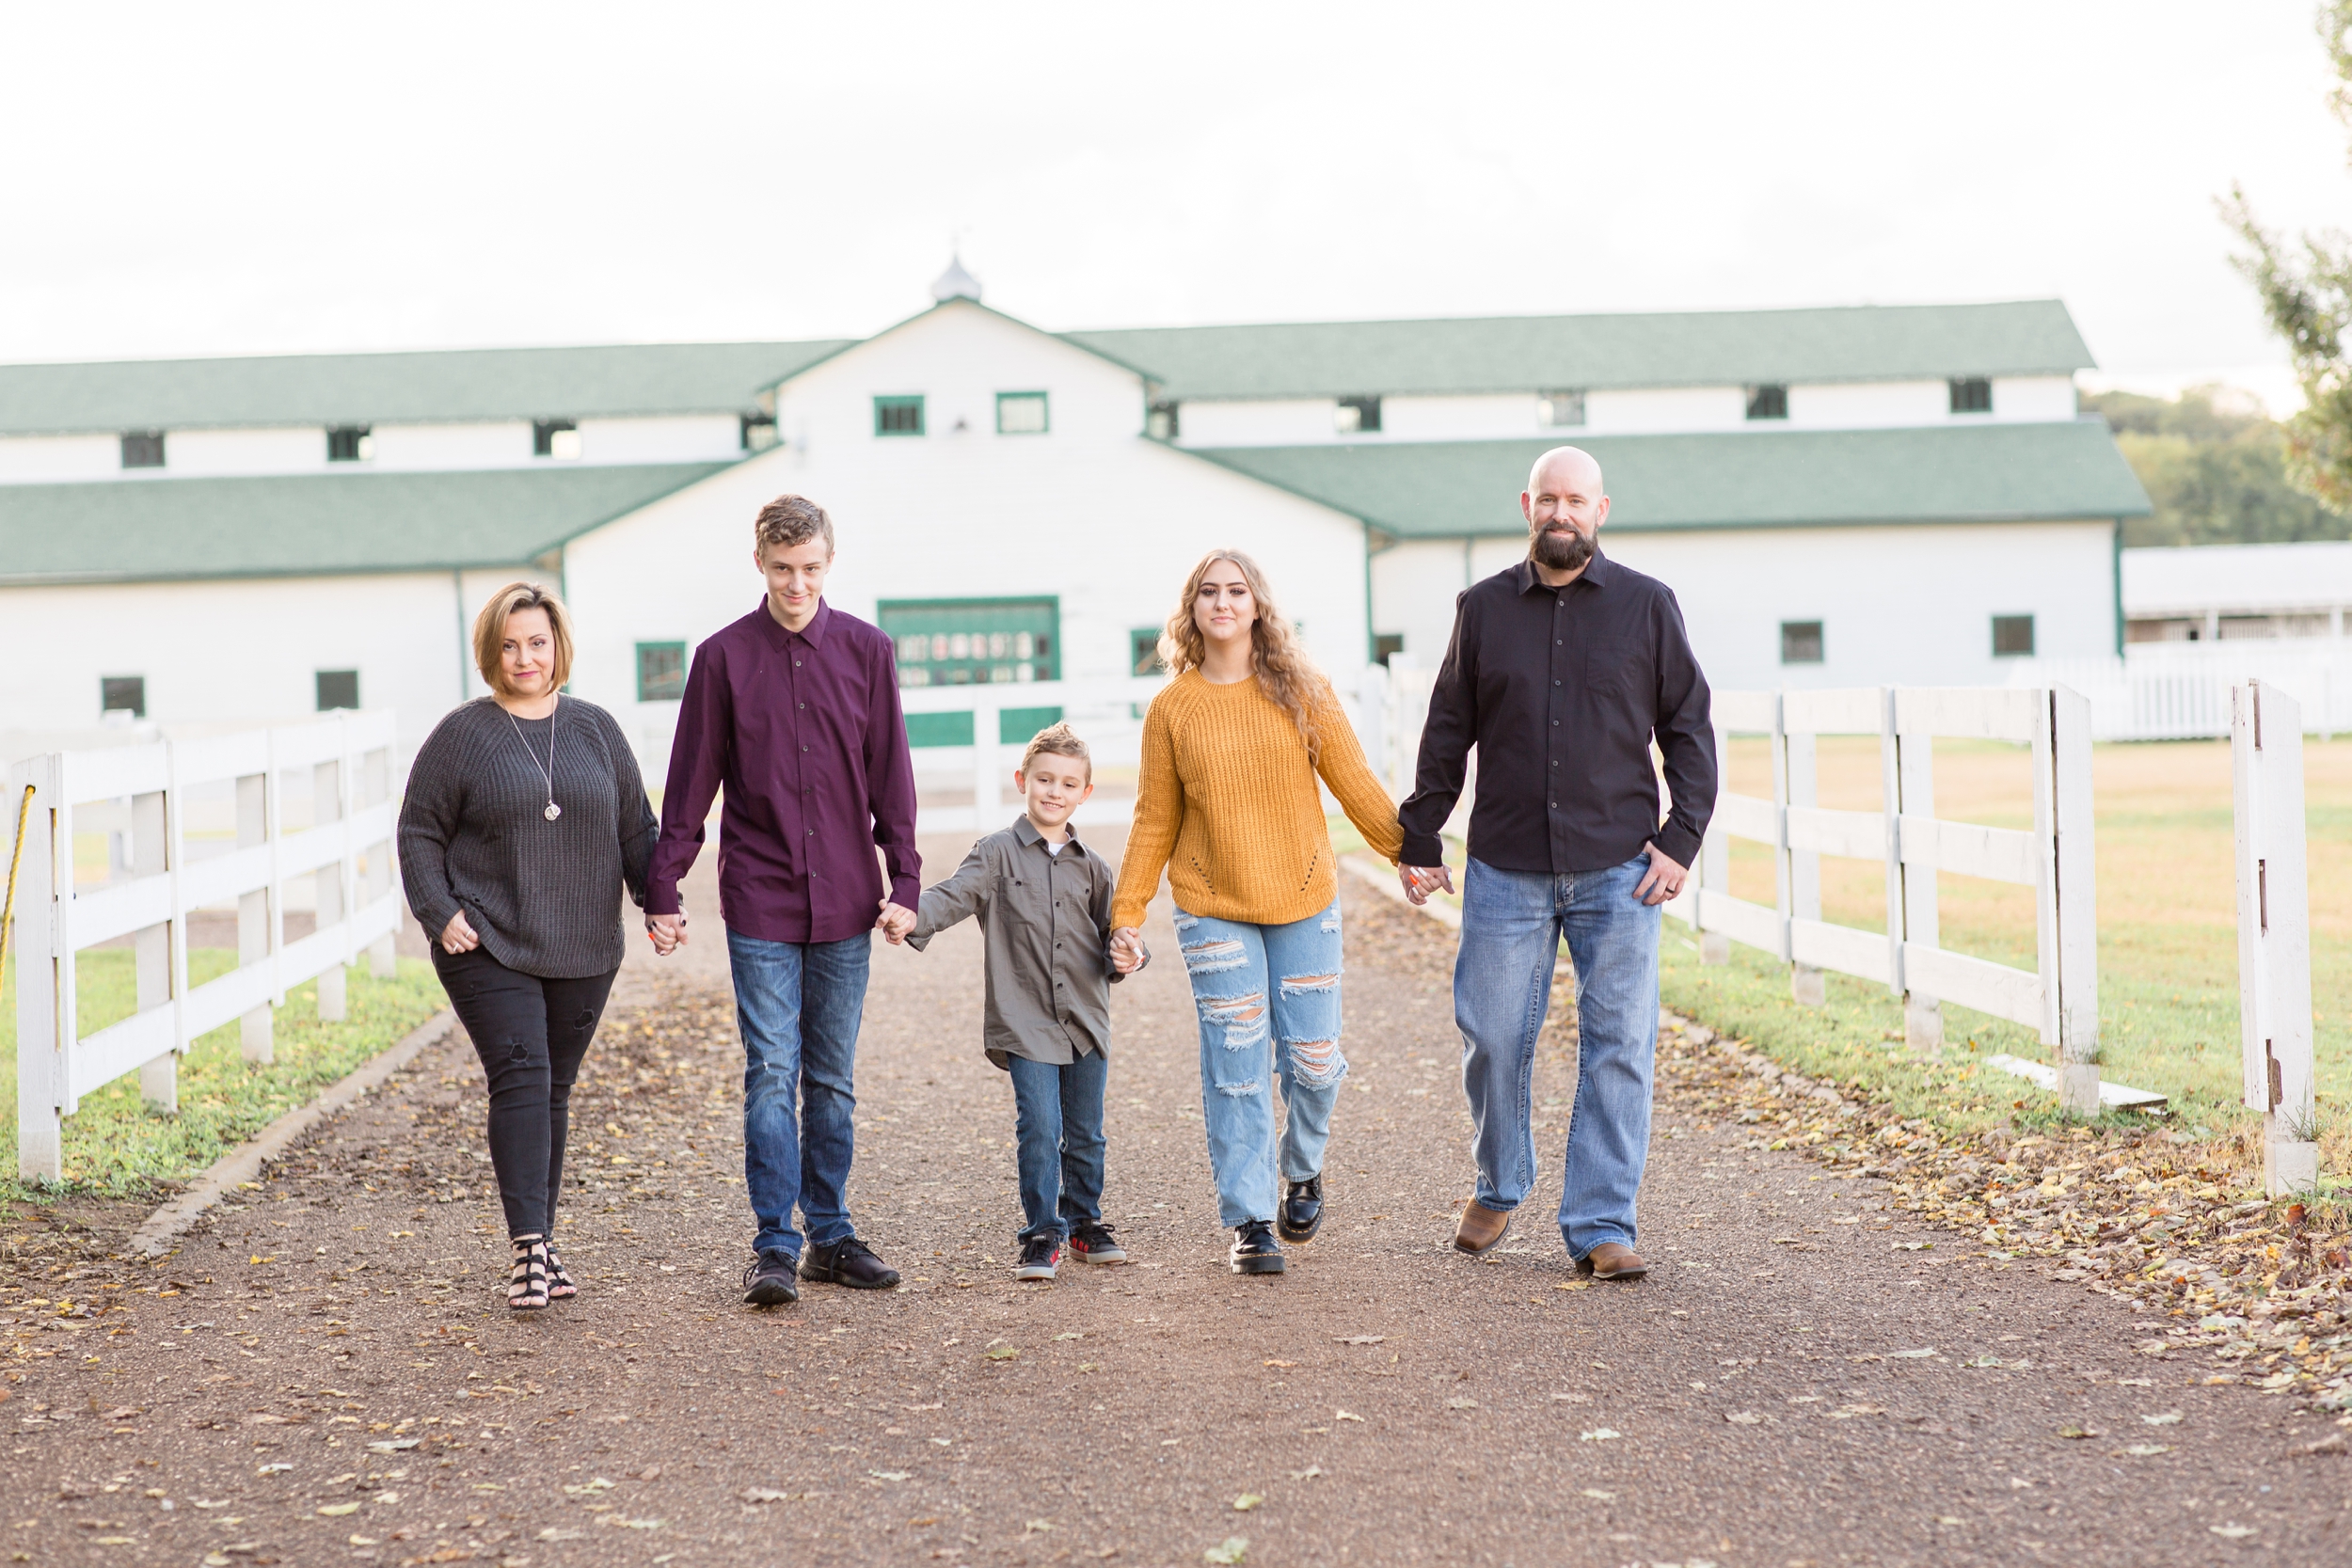 Fall mini session with family of 5 at Harlinsdale Farm in Franklin, TN with family photographer and educator Rebecca Rice of Rebecca Rice Photography. Click to see more from this sweet set of minis live on the blog now! 